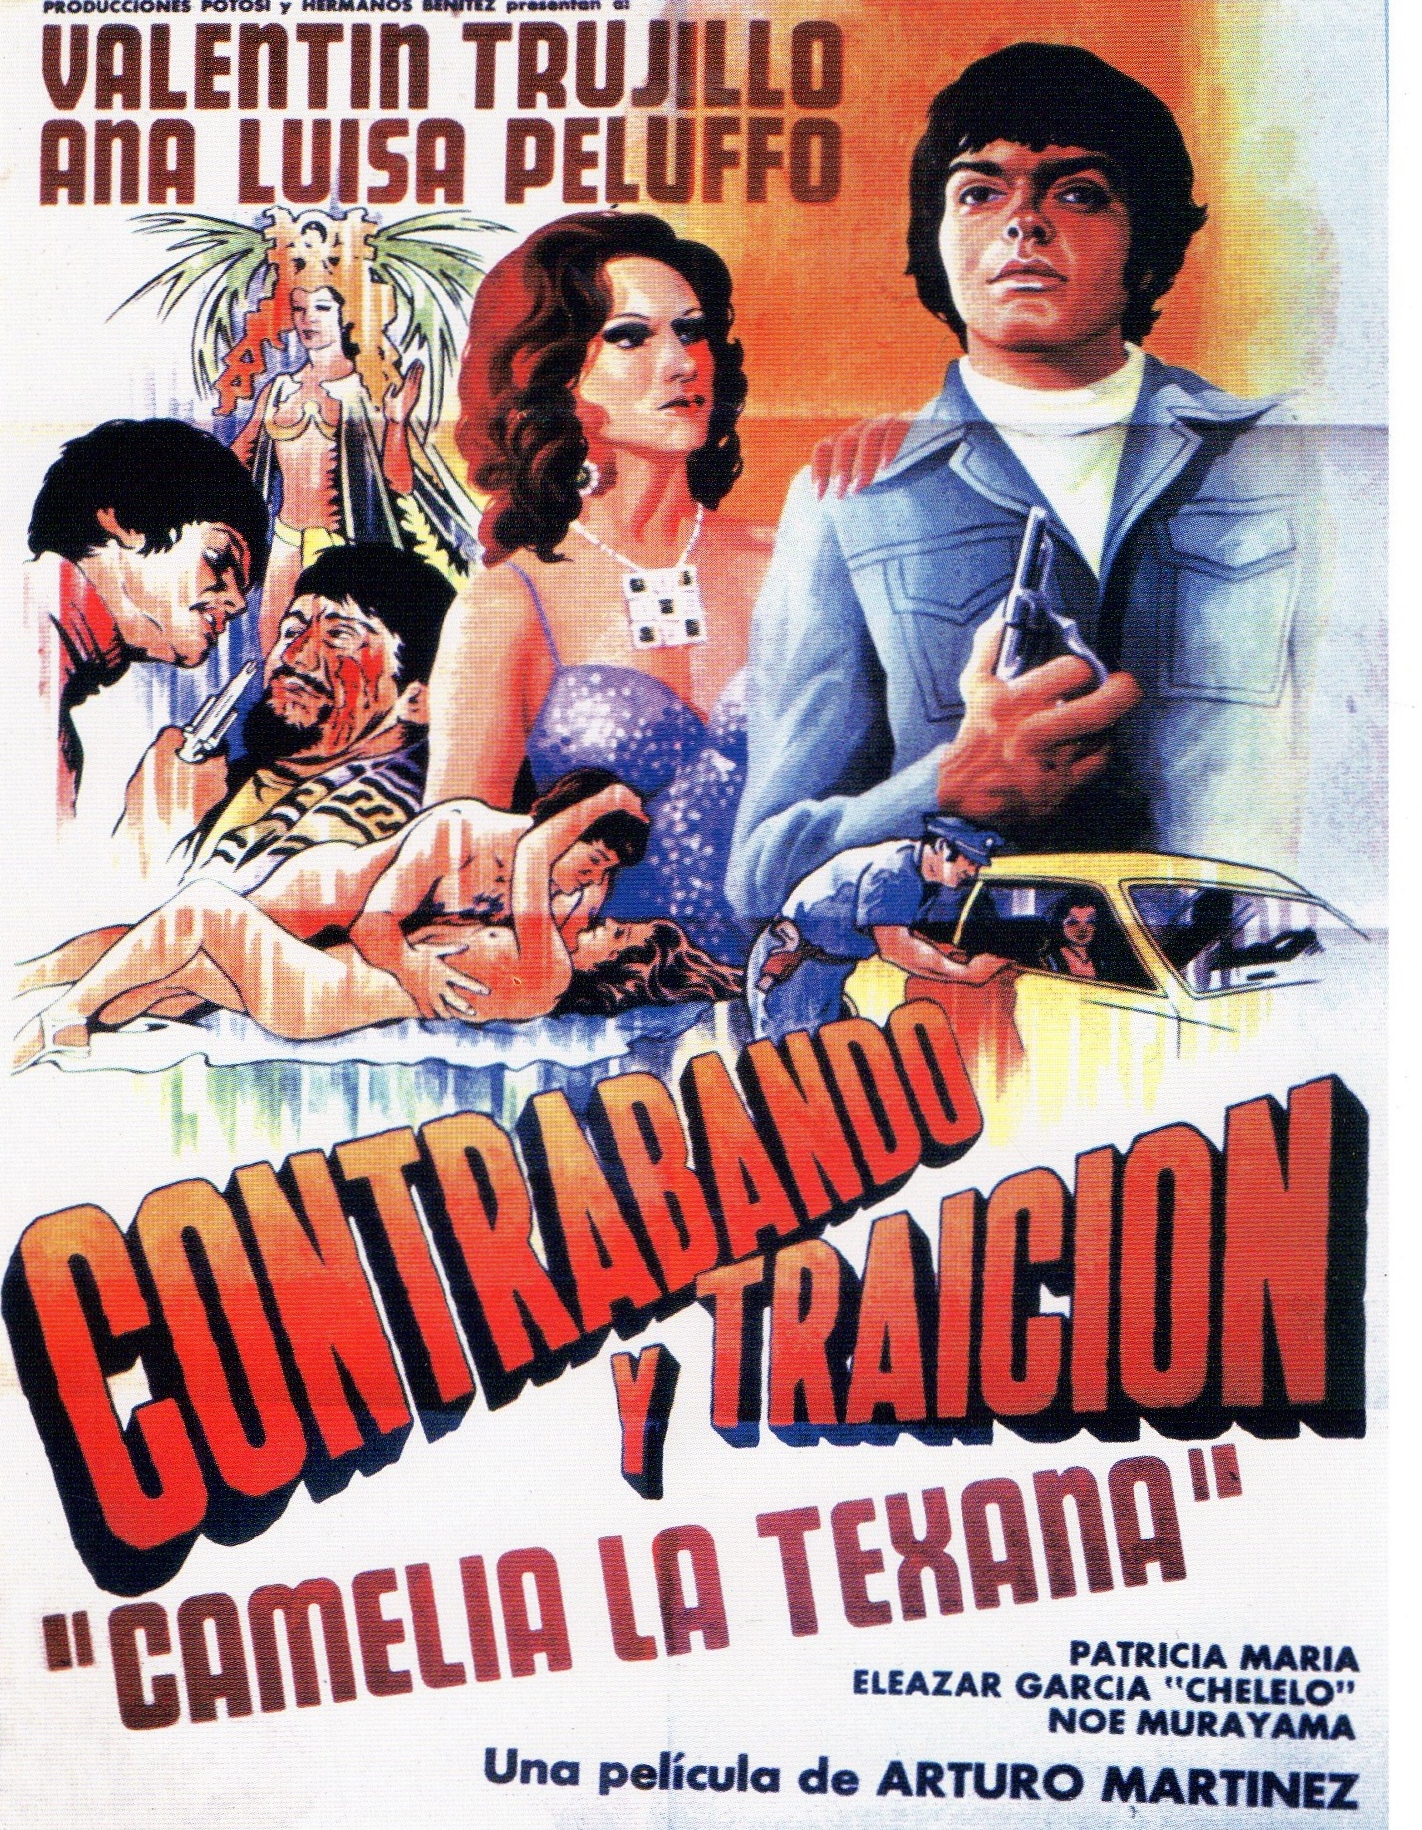 Poster for the movie named after the song